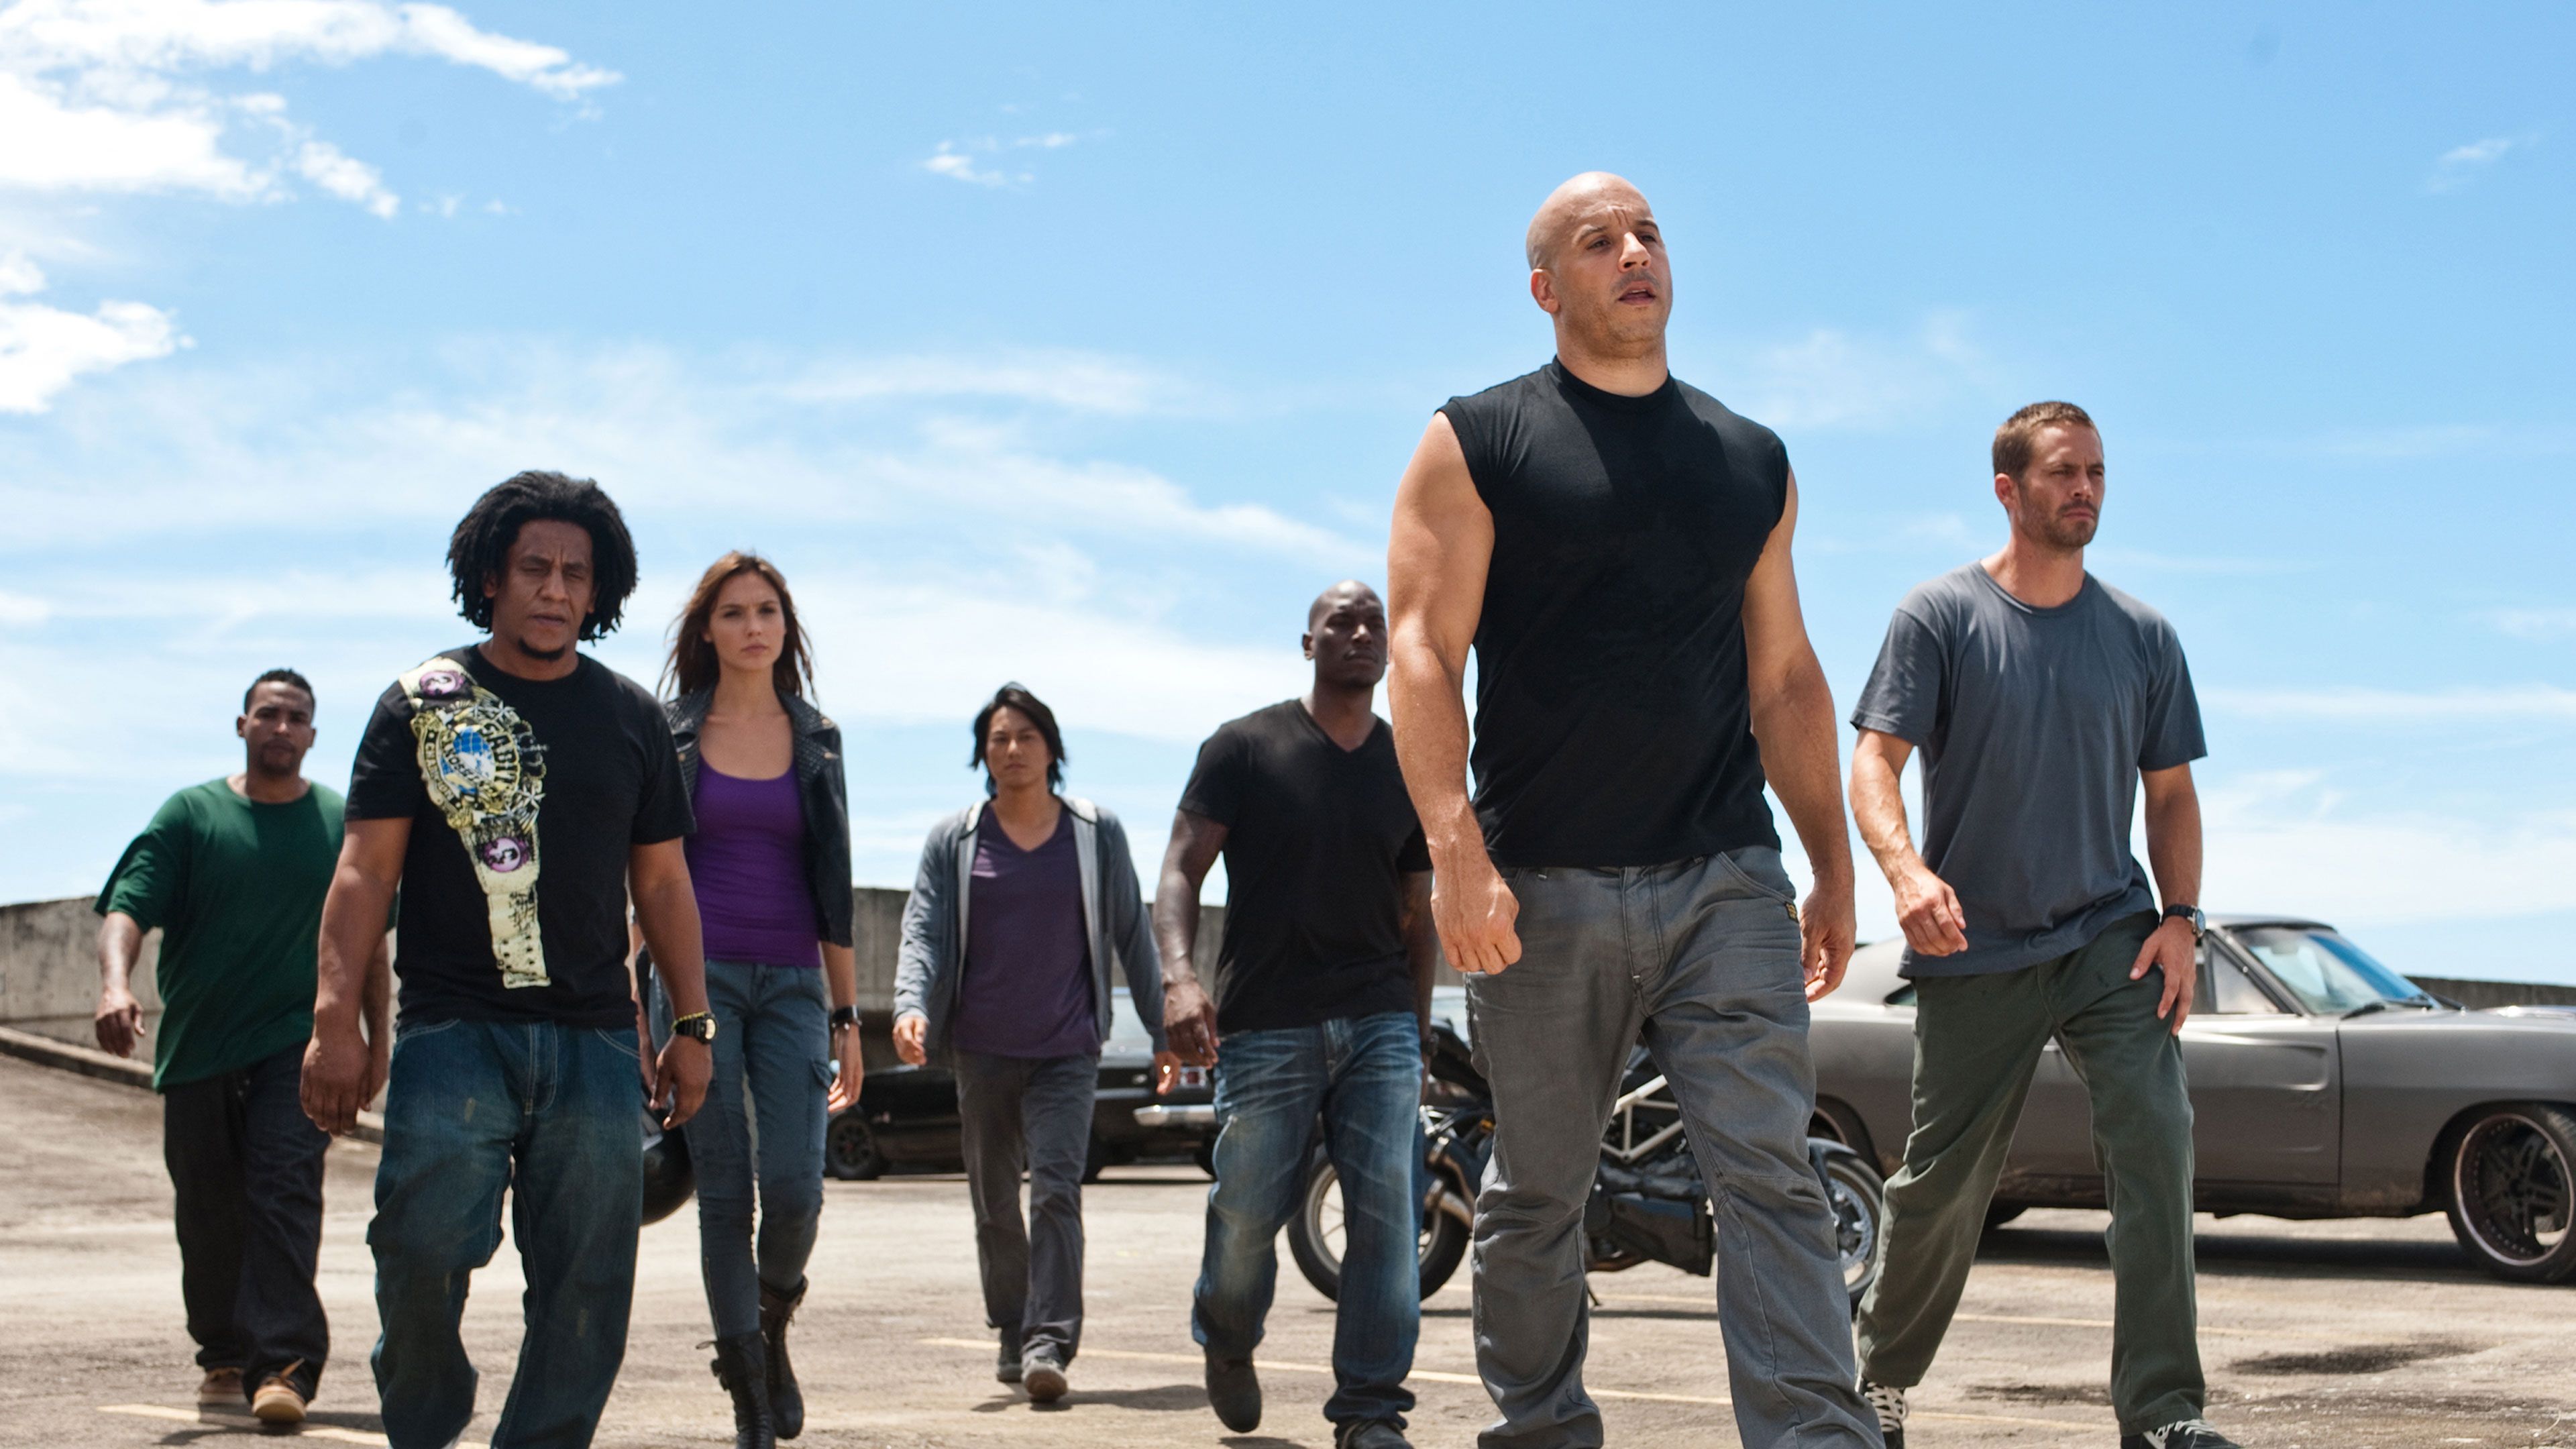 full movie stream free online fast and the furious 8